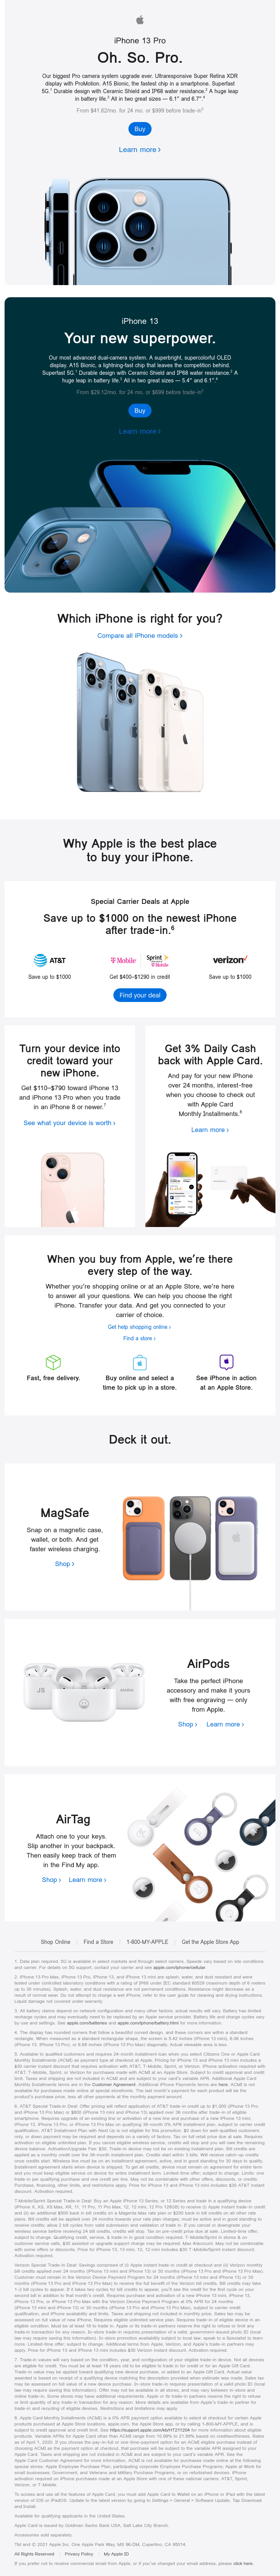 Apple Iphone promotion email template